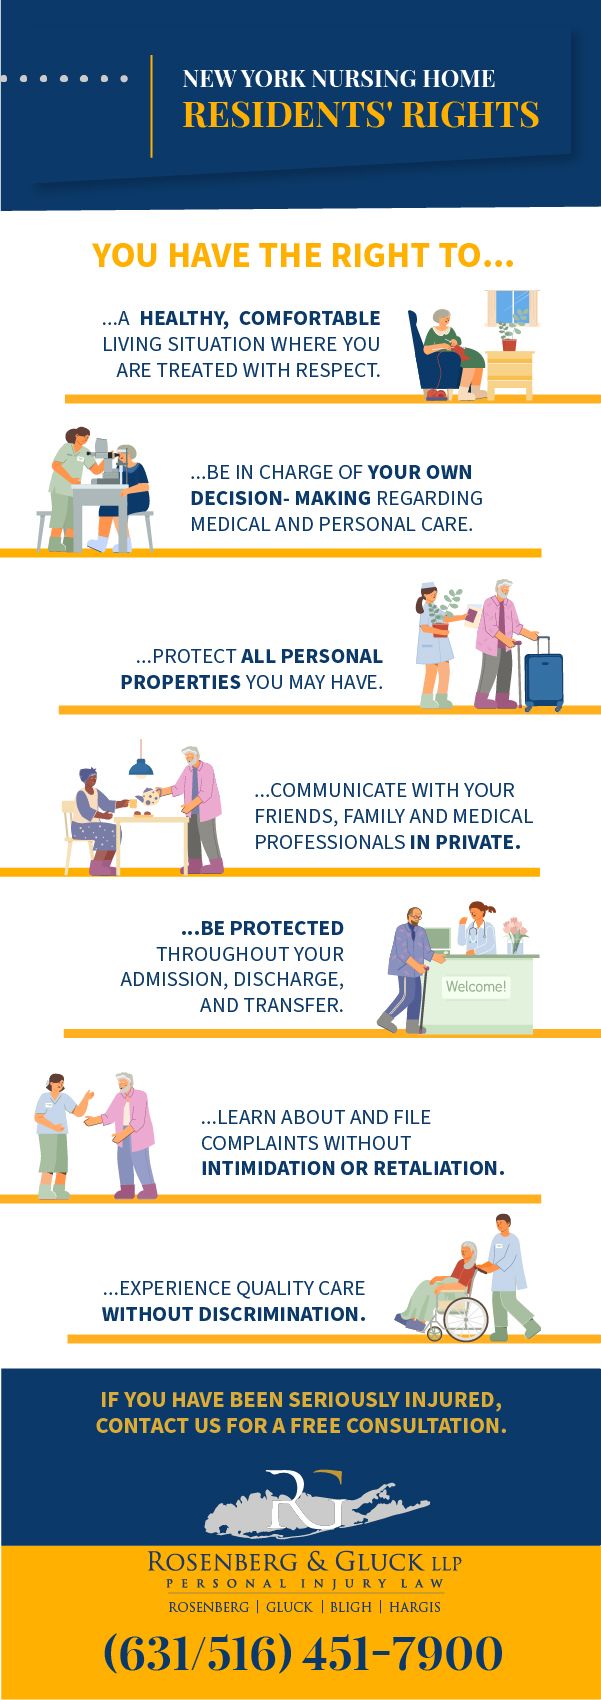 NY Nursing Home Residents Rights Infographic